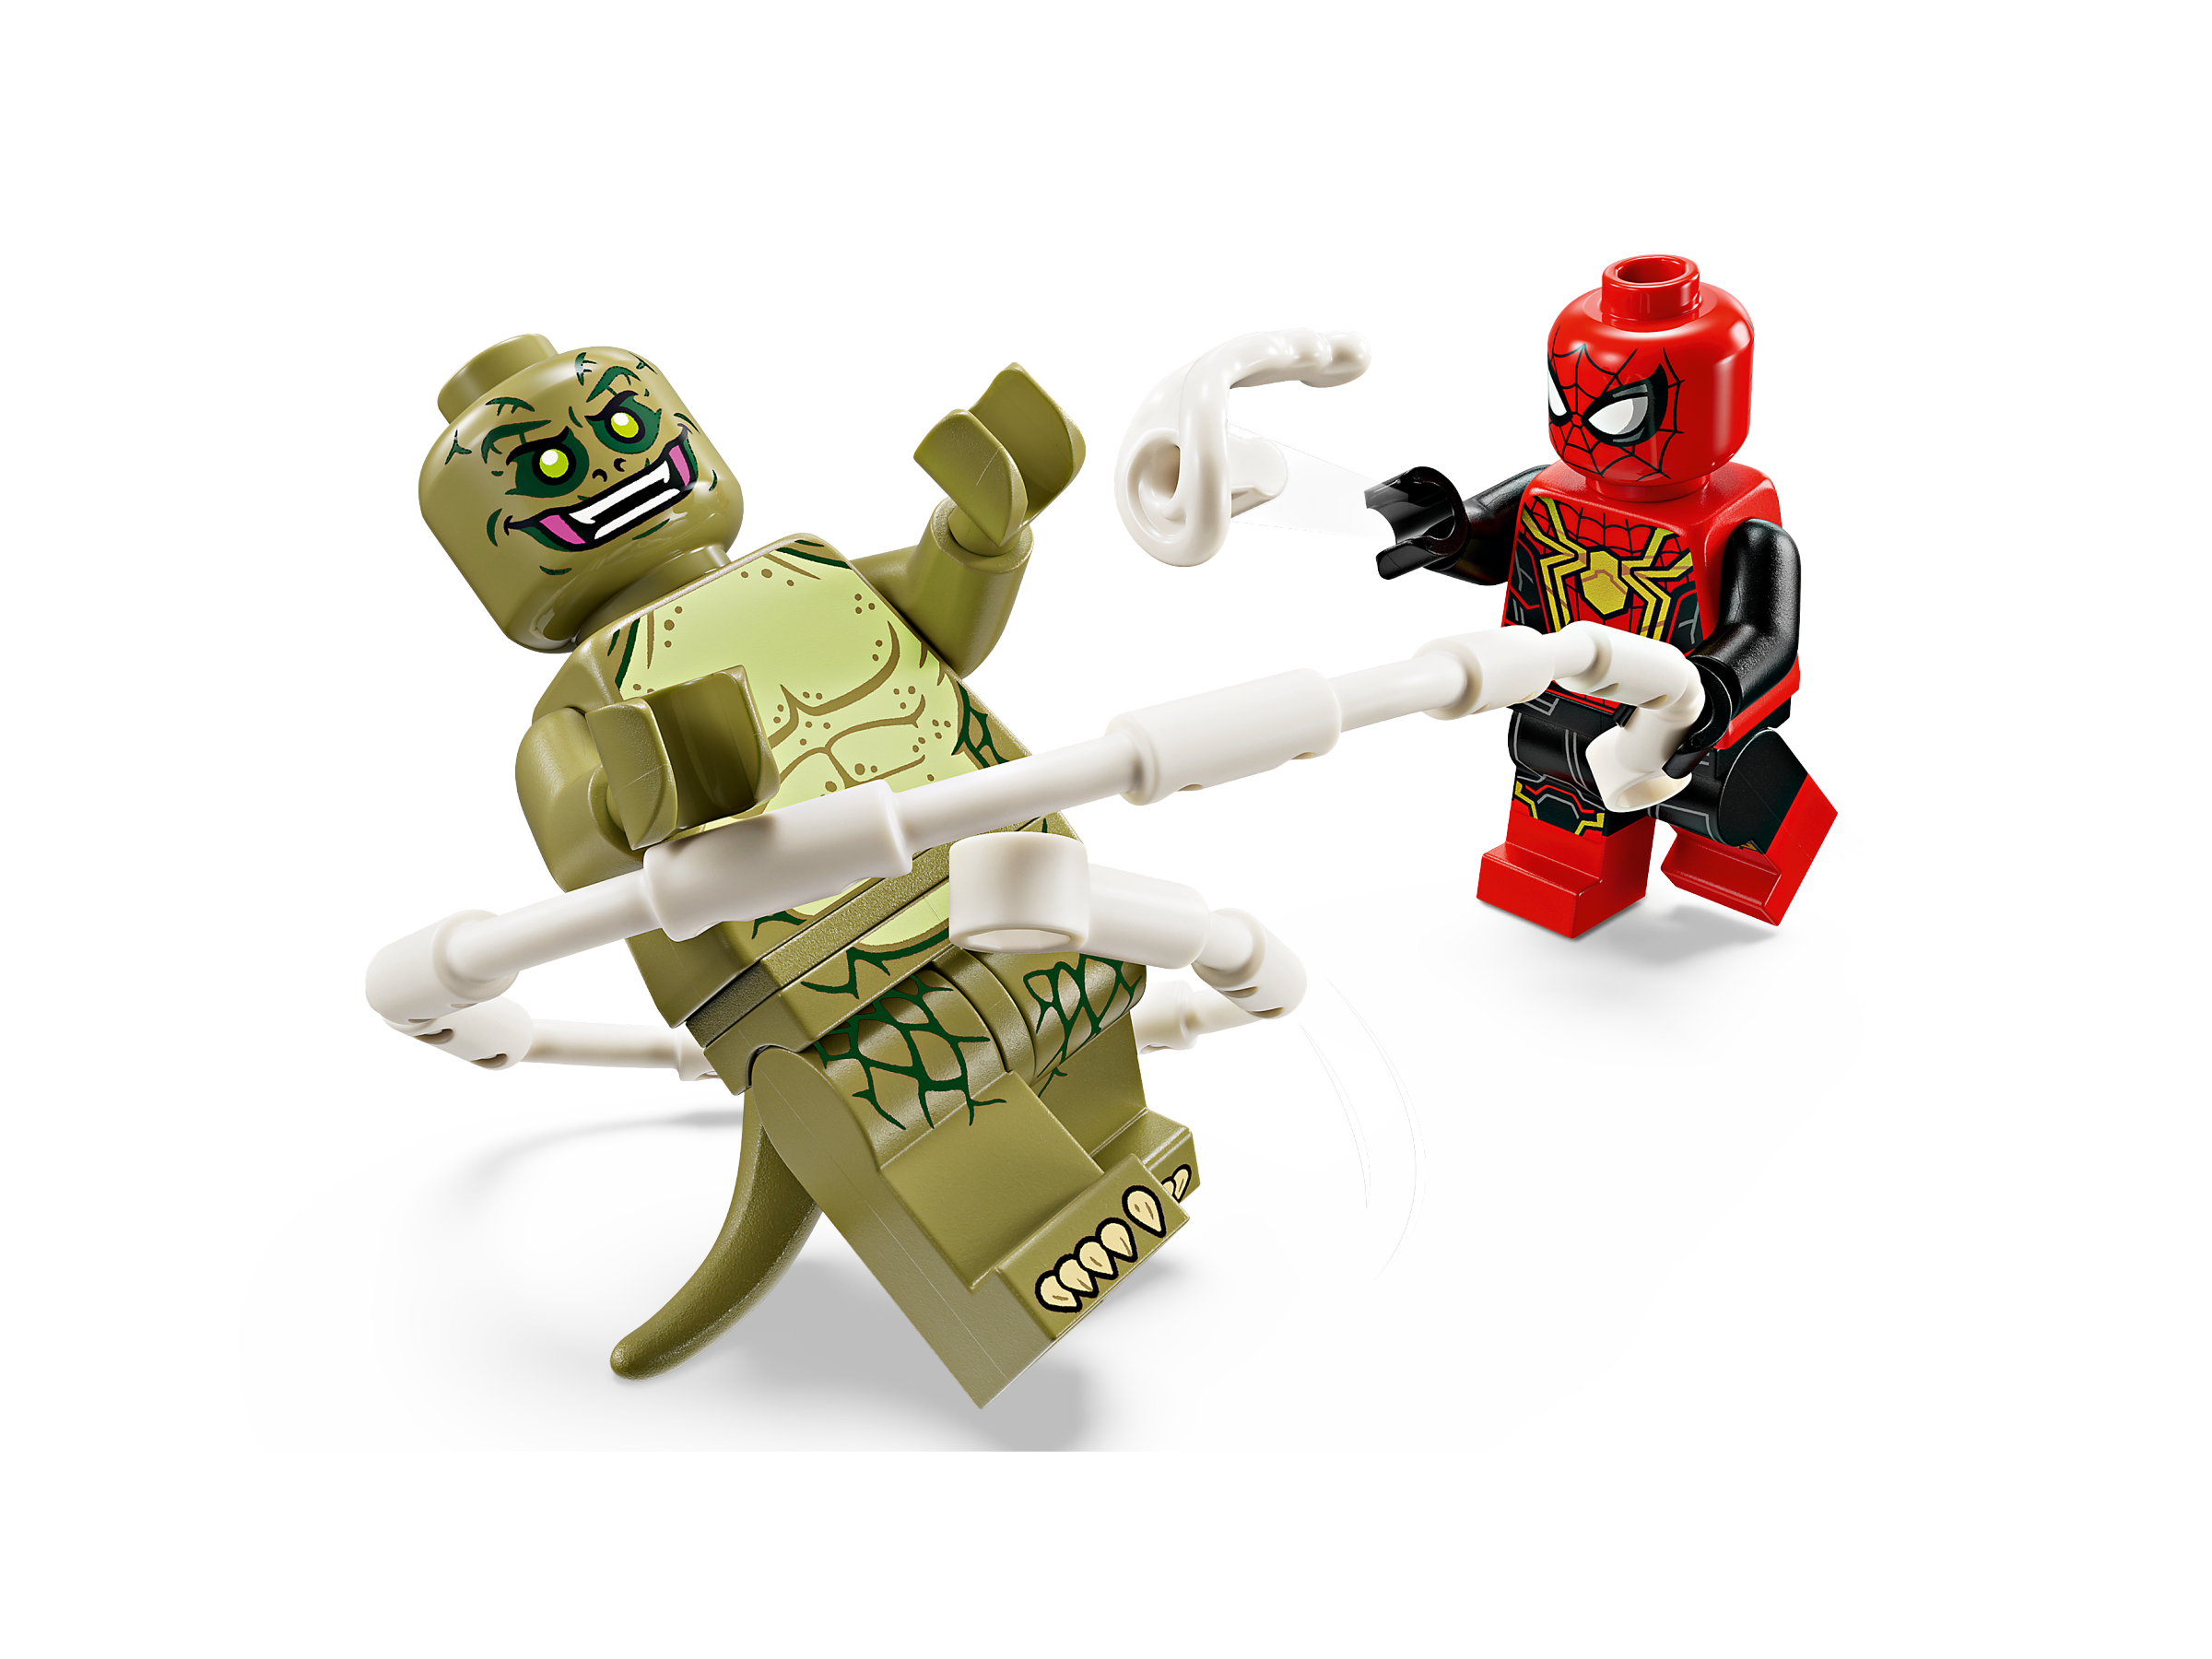 New Lego Spiderman No Way Home set number 76280, releasing January